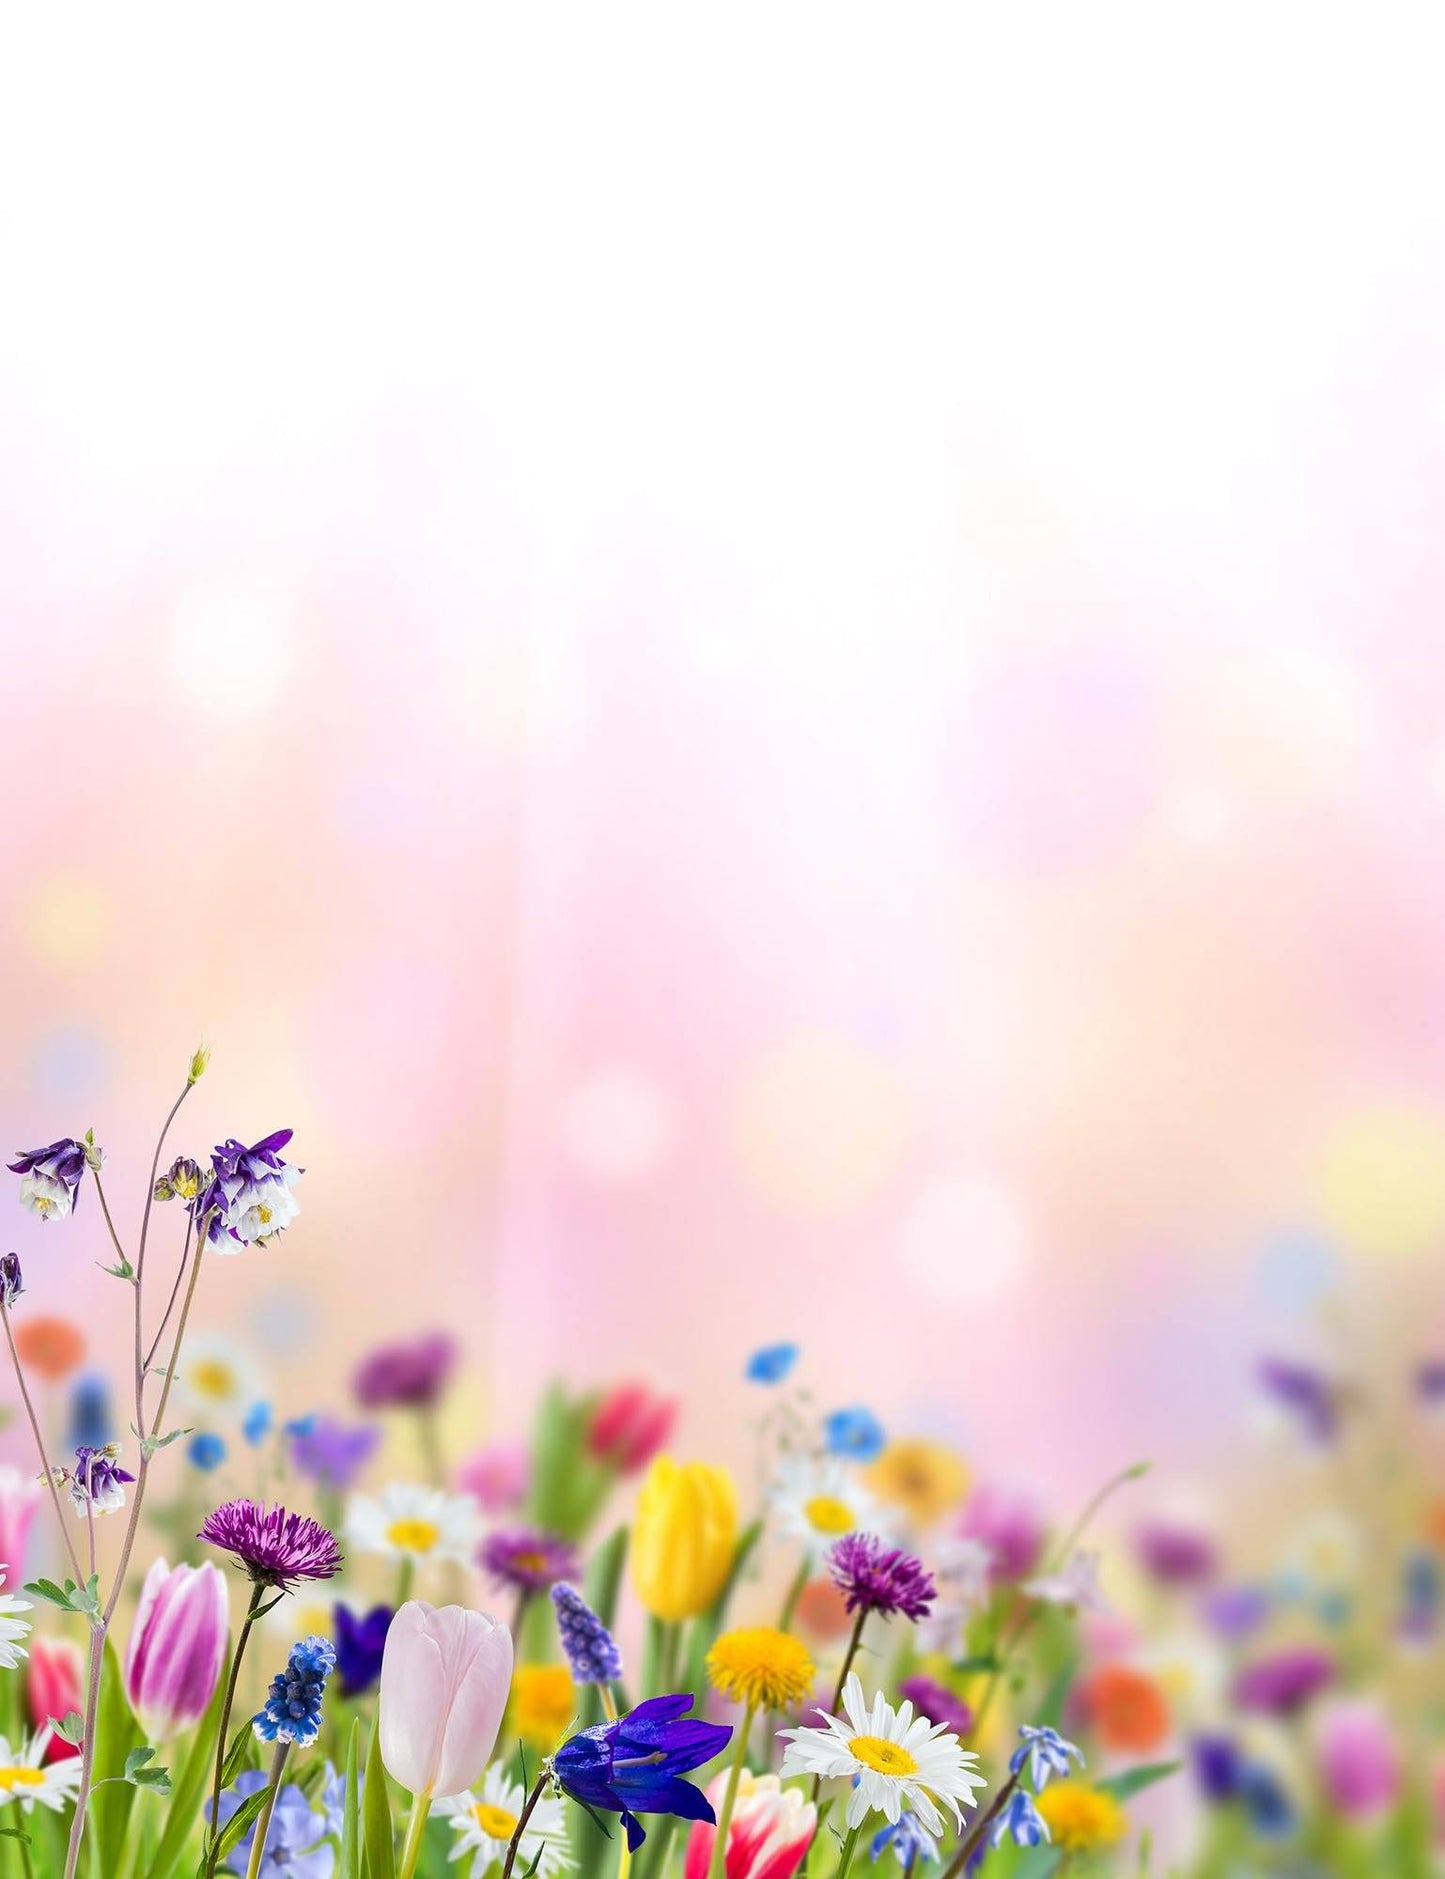 Bokeh Sunshine Wildflowers With Pink Background For Baby Backdrop Shopbackdrop